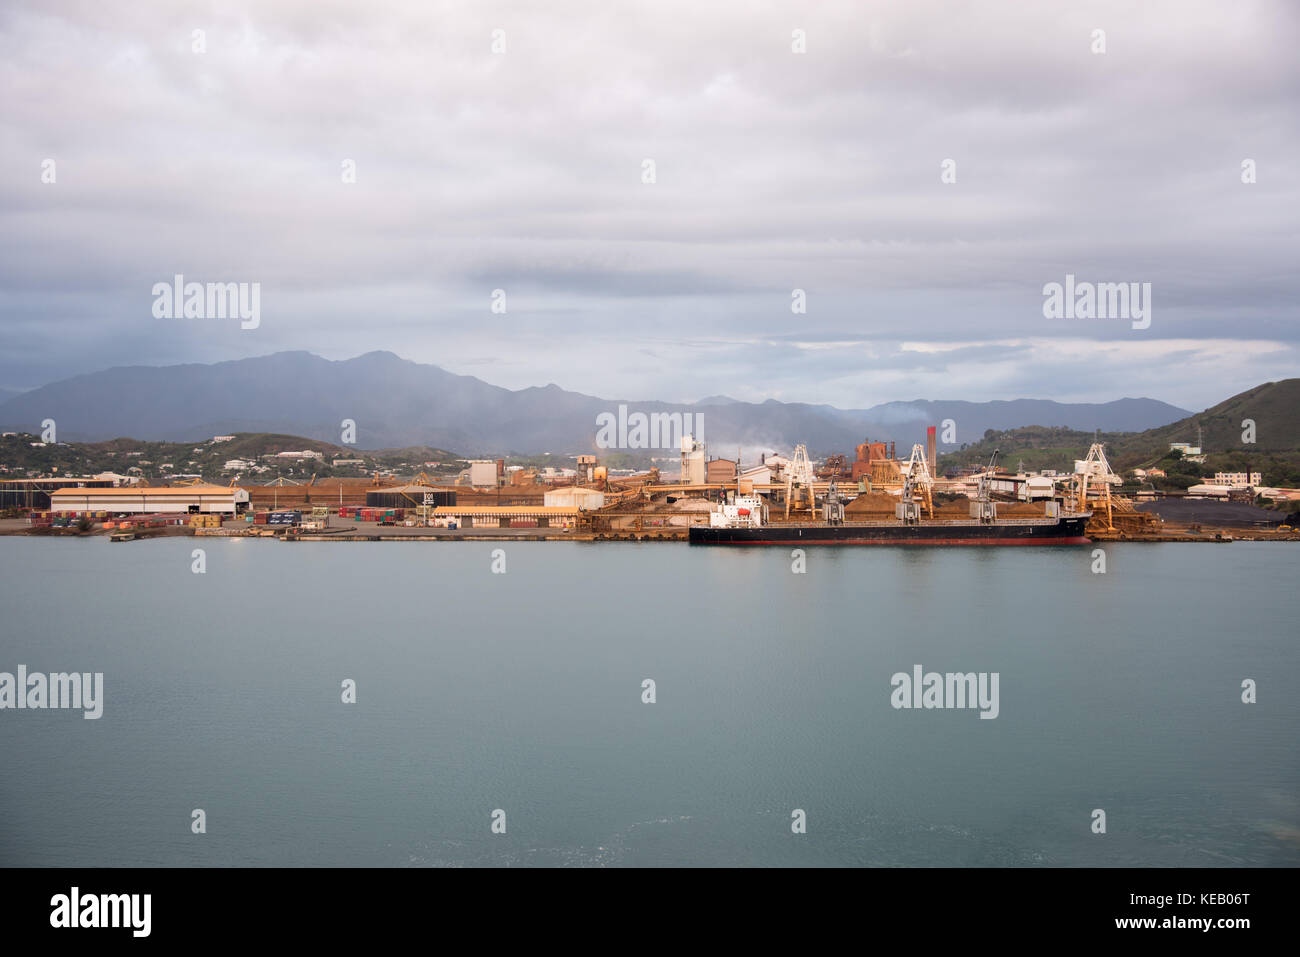 NOUMEA, NEW CALEDONIA-NOVEMBER 25,2016: Bulk carrier at commercial dock with SLN Plant, smoke stack, and mountain view in Noumea, New Caledonia. Stock Photo